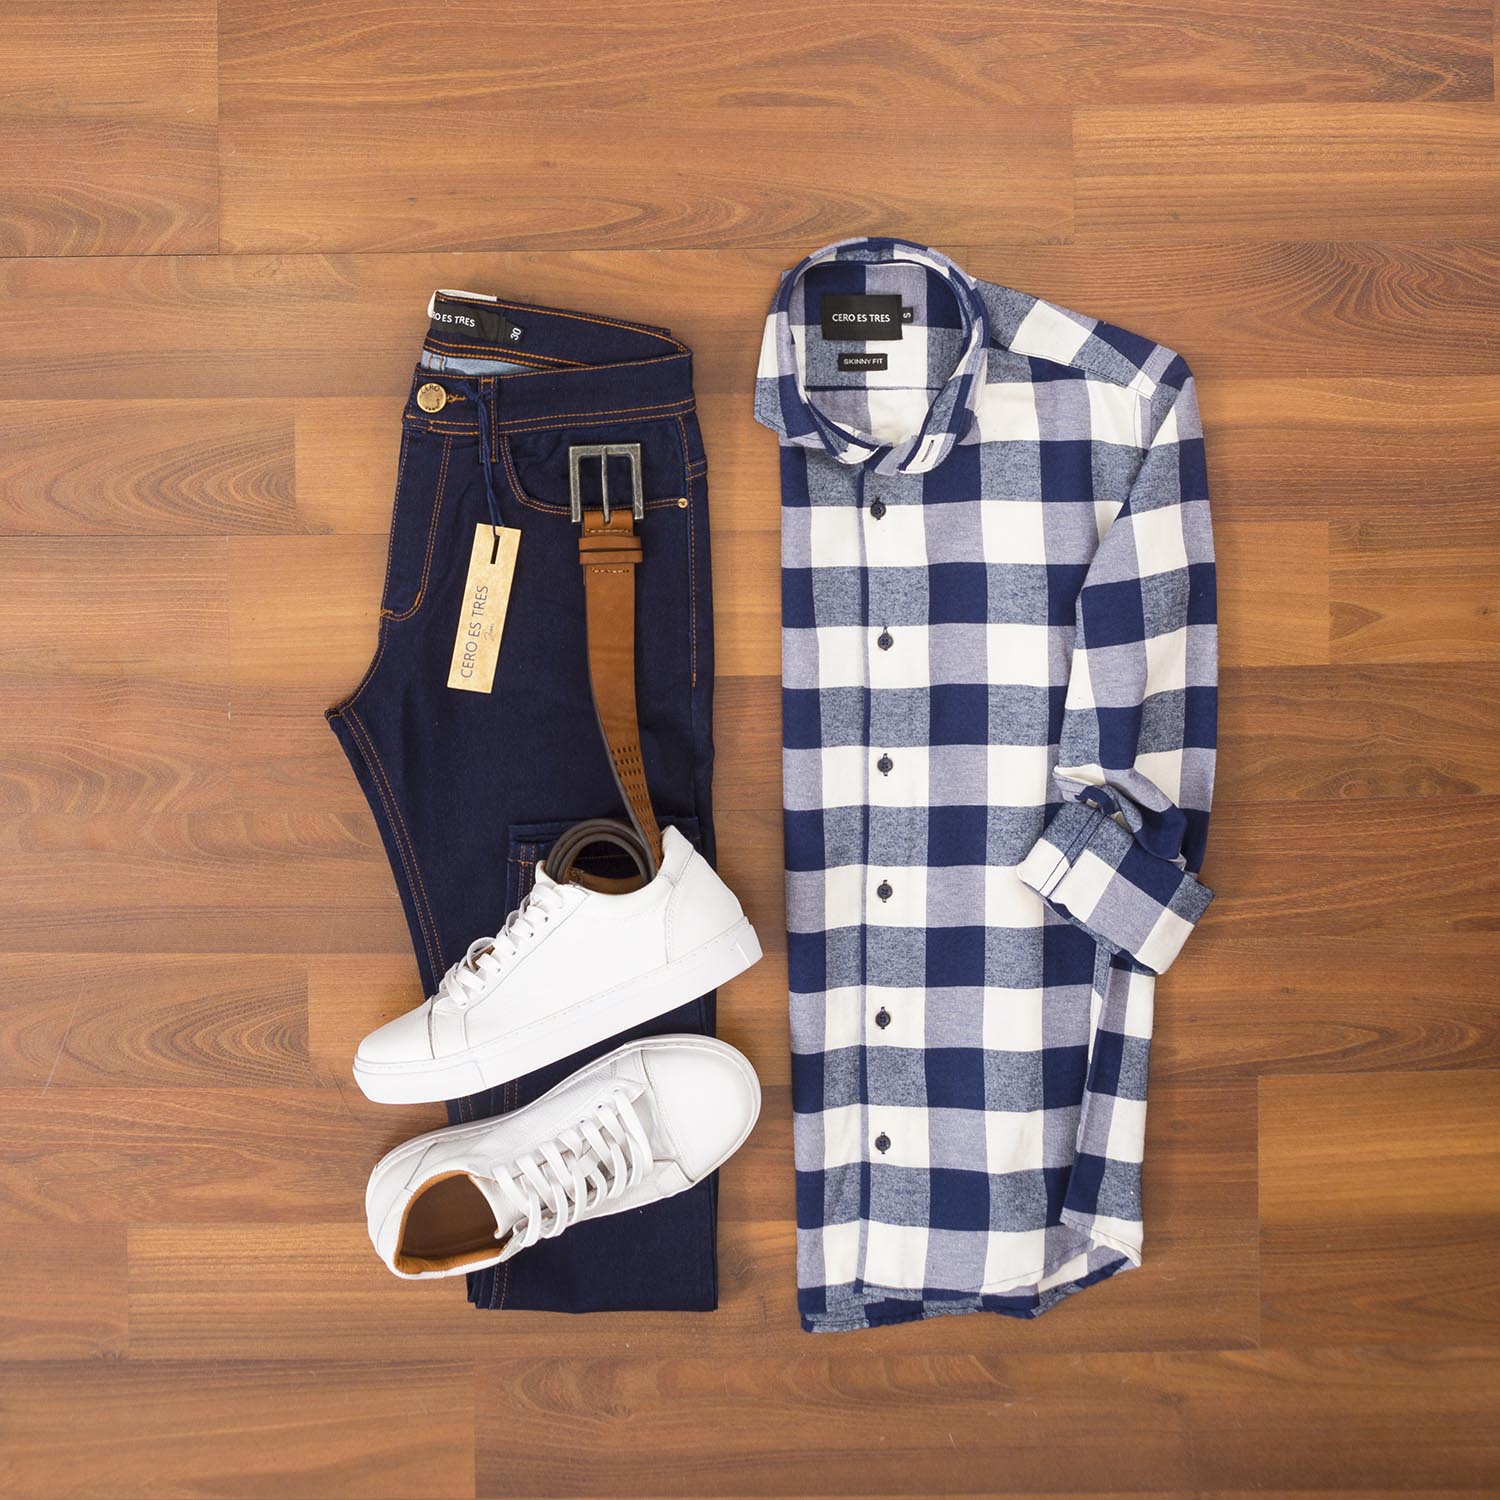 OUTFIT CERO 237